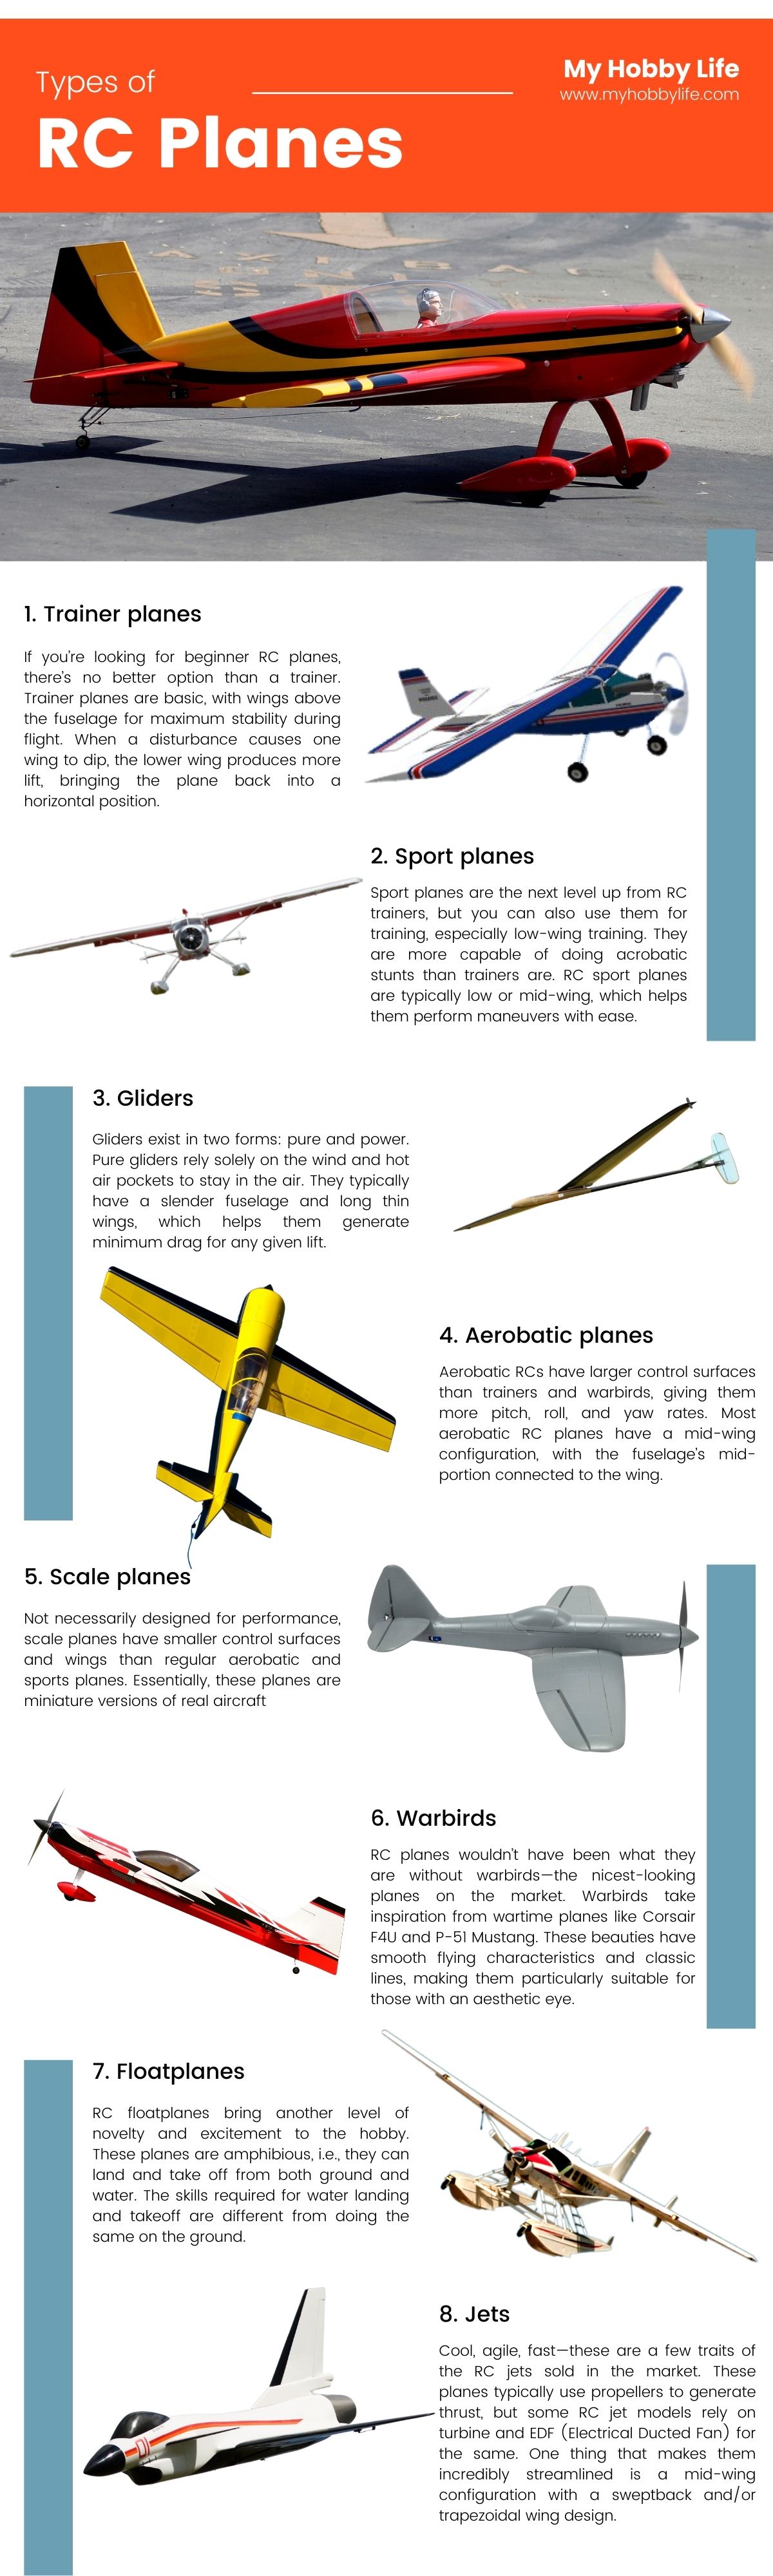 Types of RC Planes